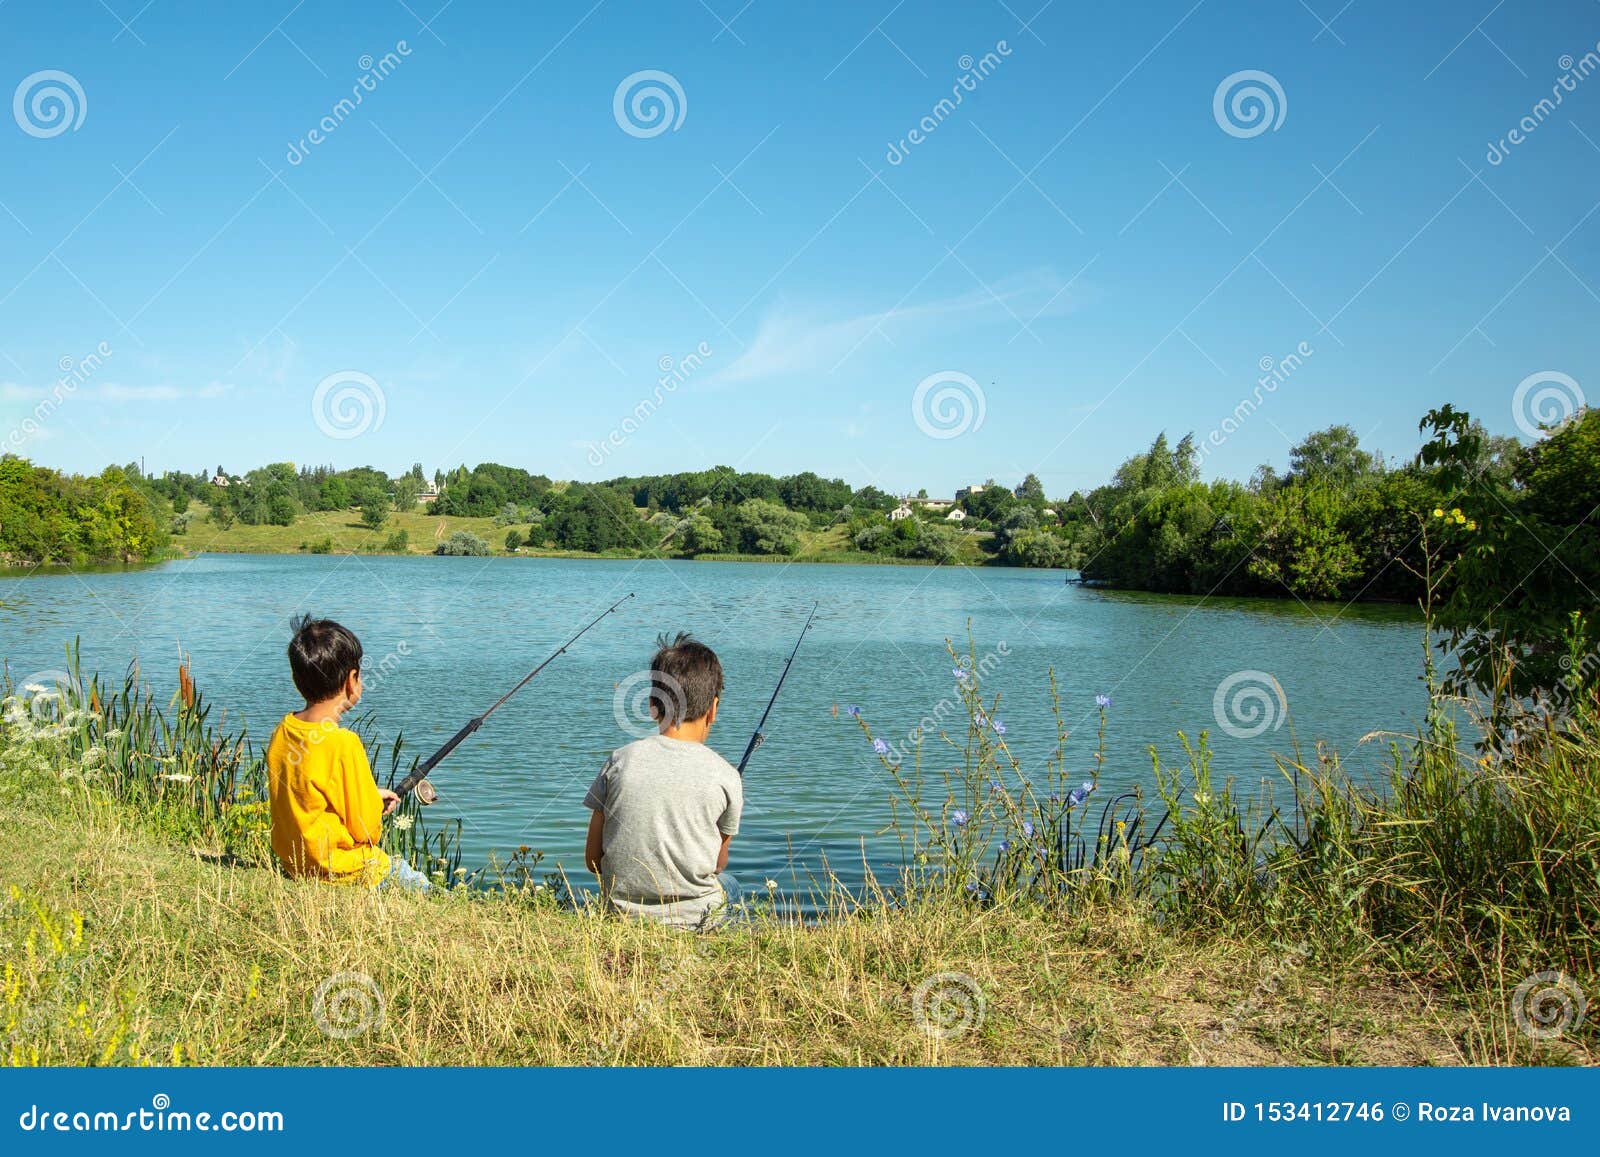 https://thumbs.dreamstime.com/z/two-boys-fishing-rods-catch-fish-pond-grandfather-sitting-shore-surrounded-beautiful-nature-153412746.jpg